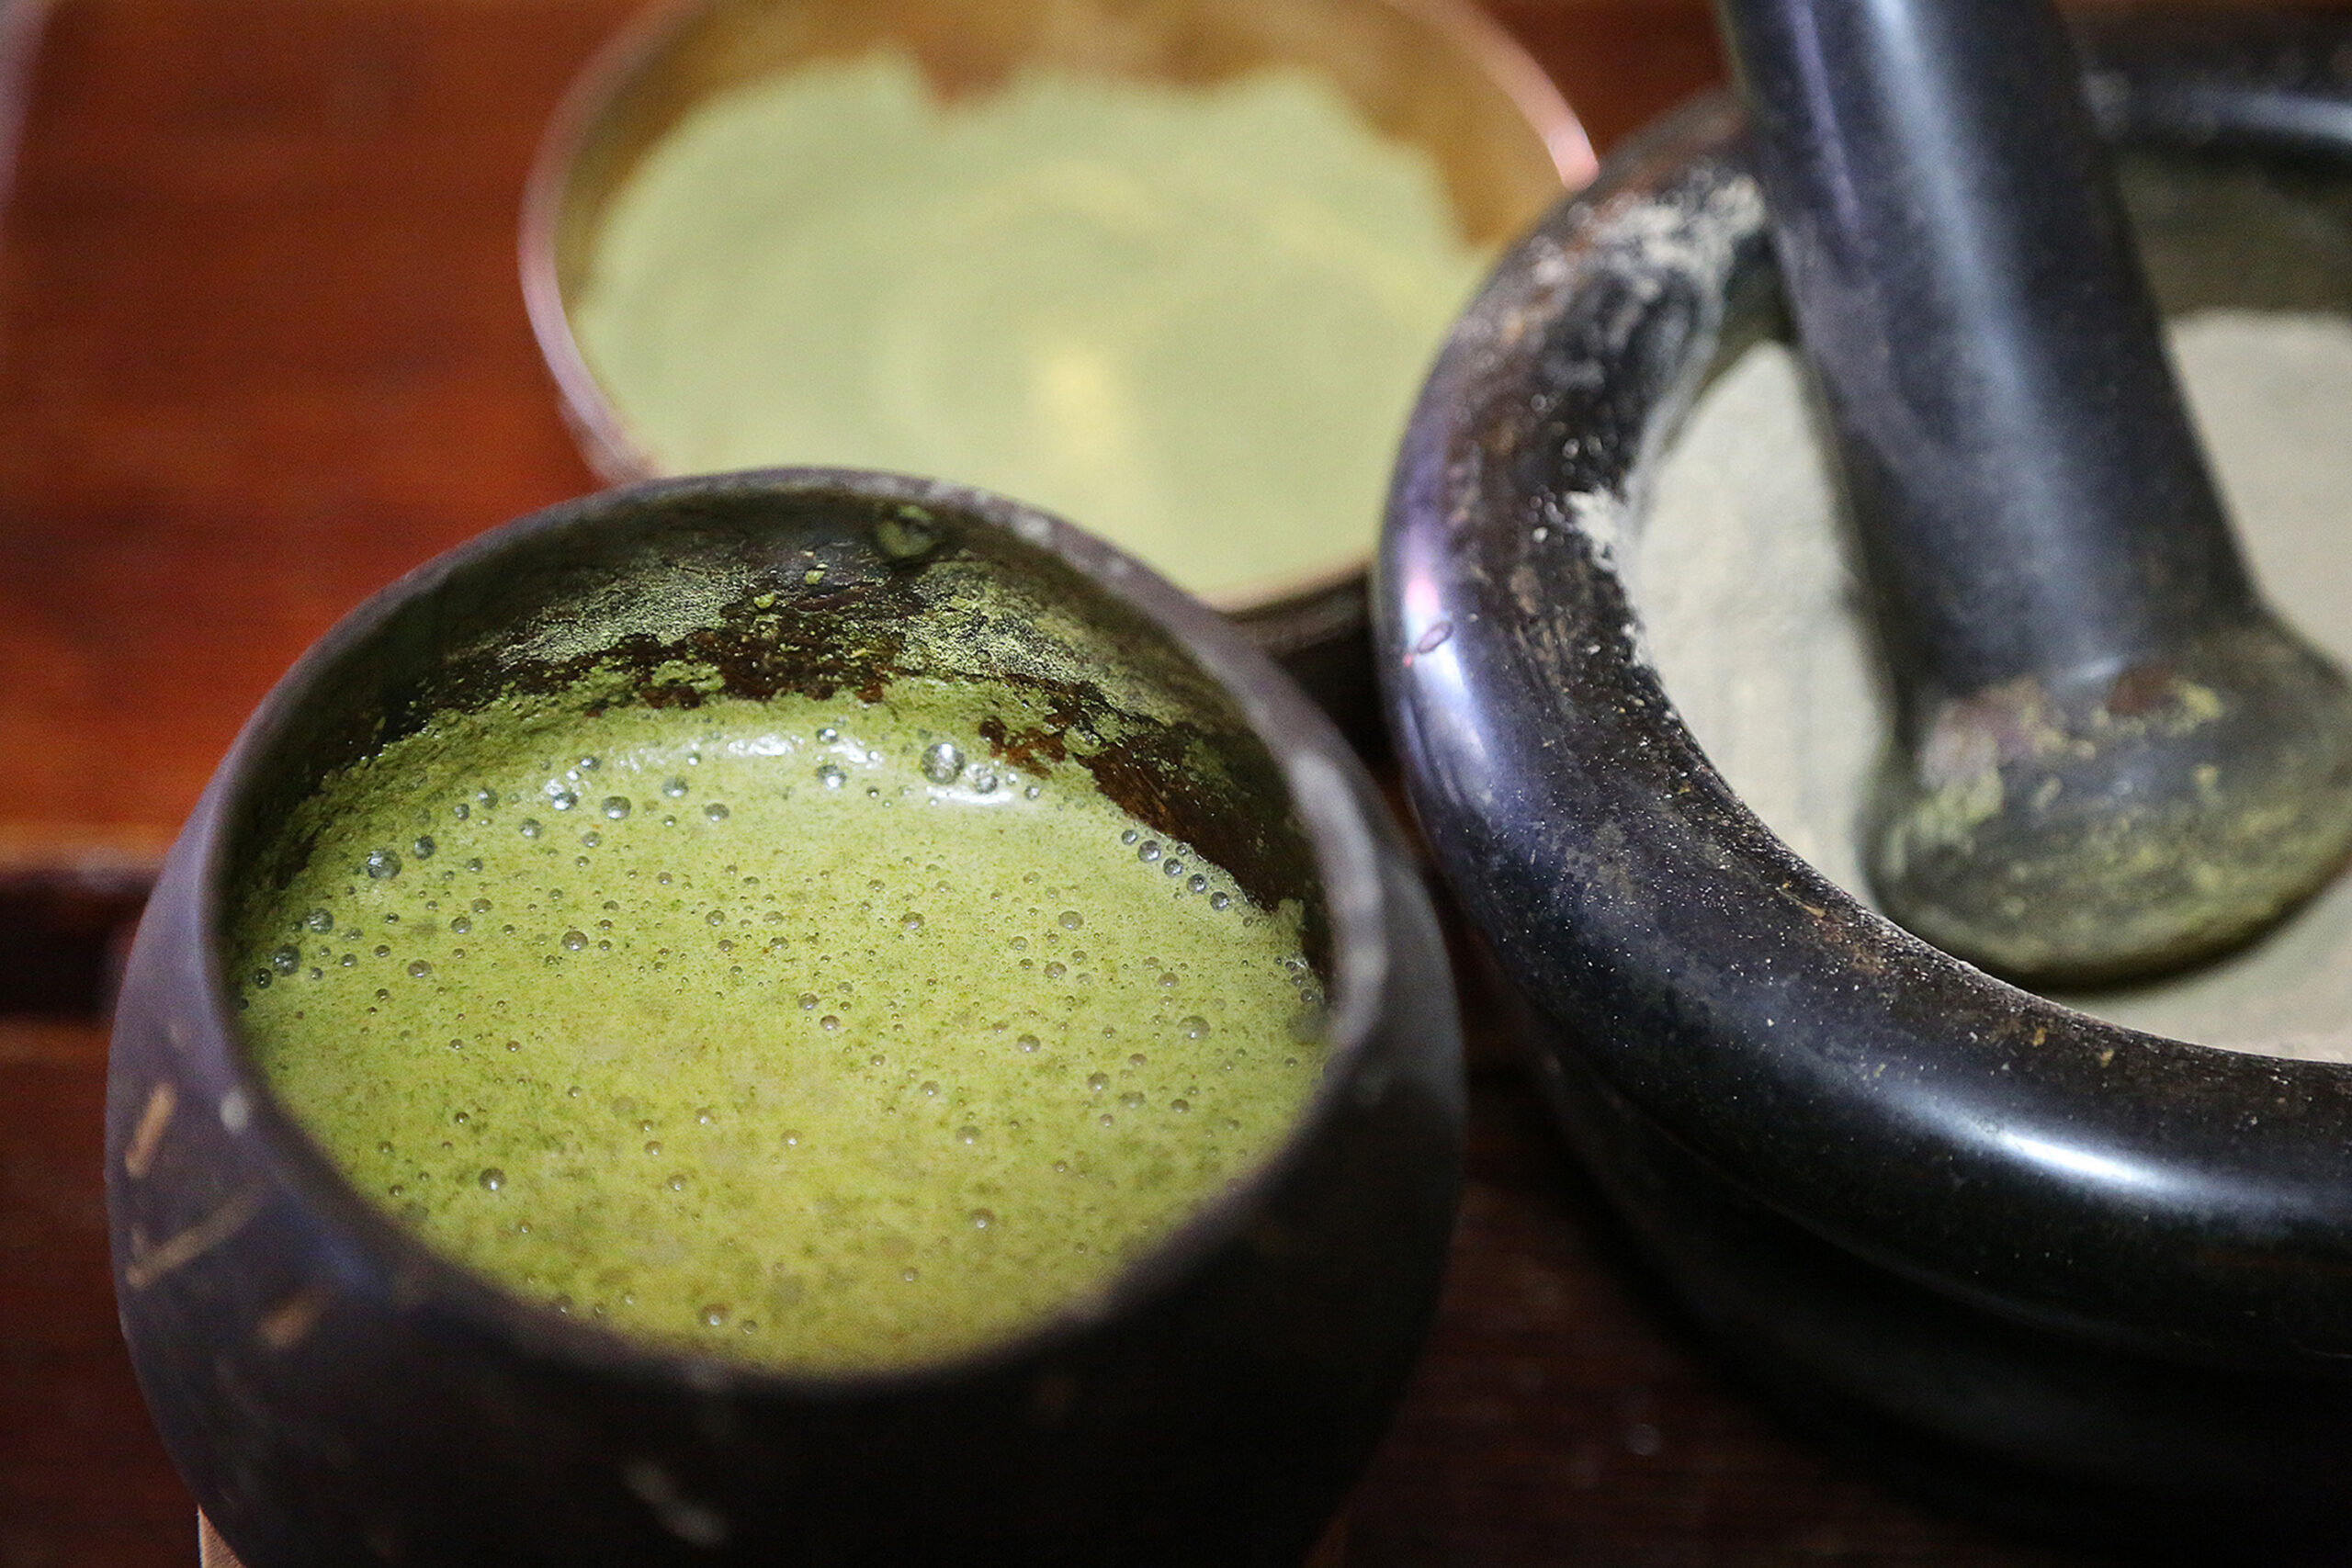 The green foam on the left is a mixture of Kava and Kratom served at Purple Lotus Kava Bar in West Palm Beach. Palm Beach County commissioners Tuesday chose to ask retailers to put up signs warning about kratom. (Carline Jean/Sun Sentinel/TNS)